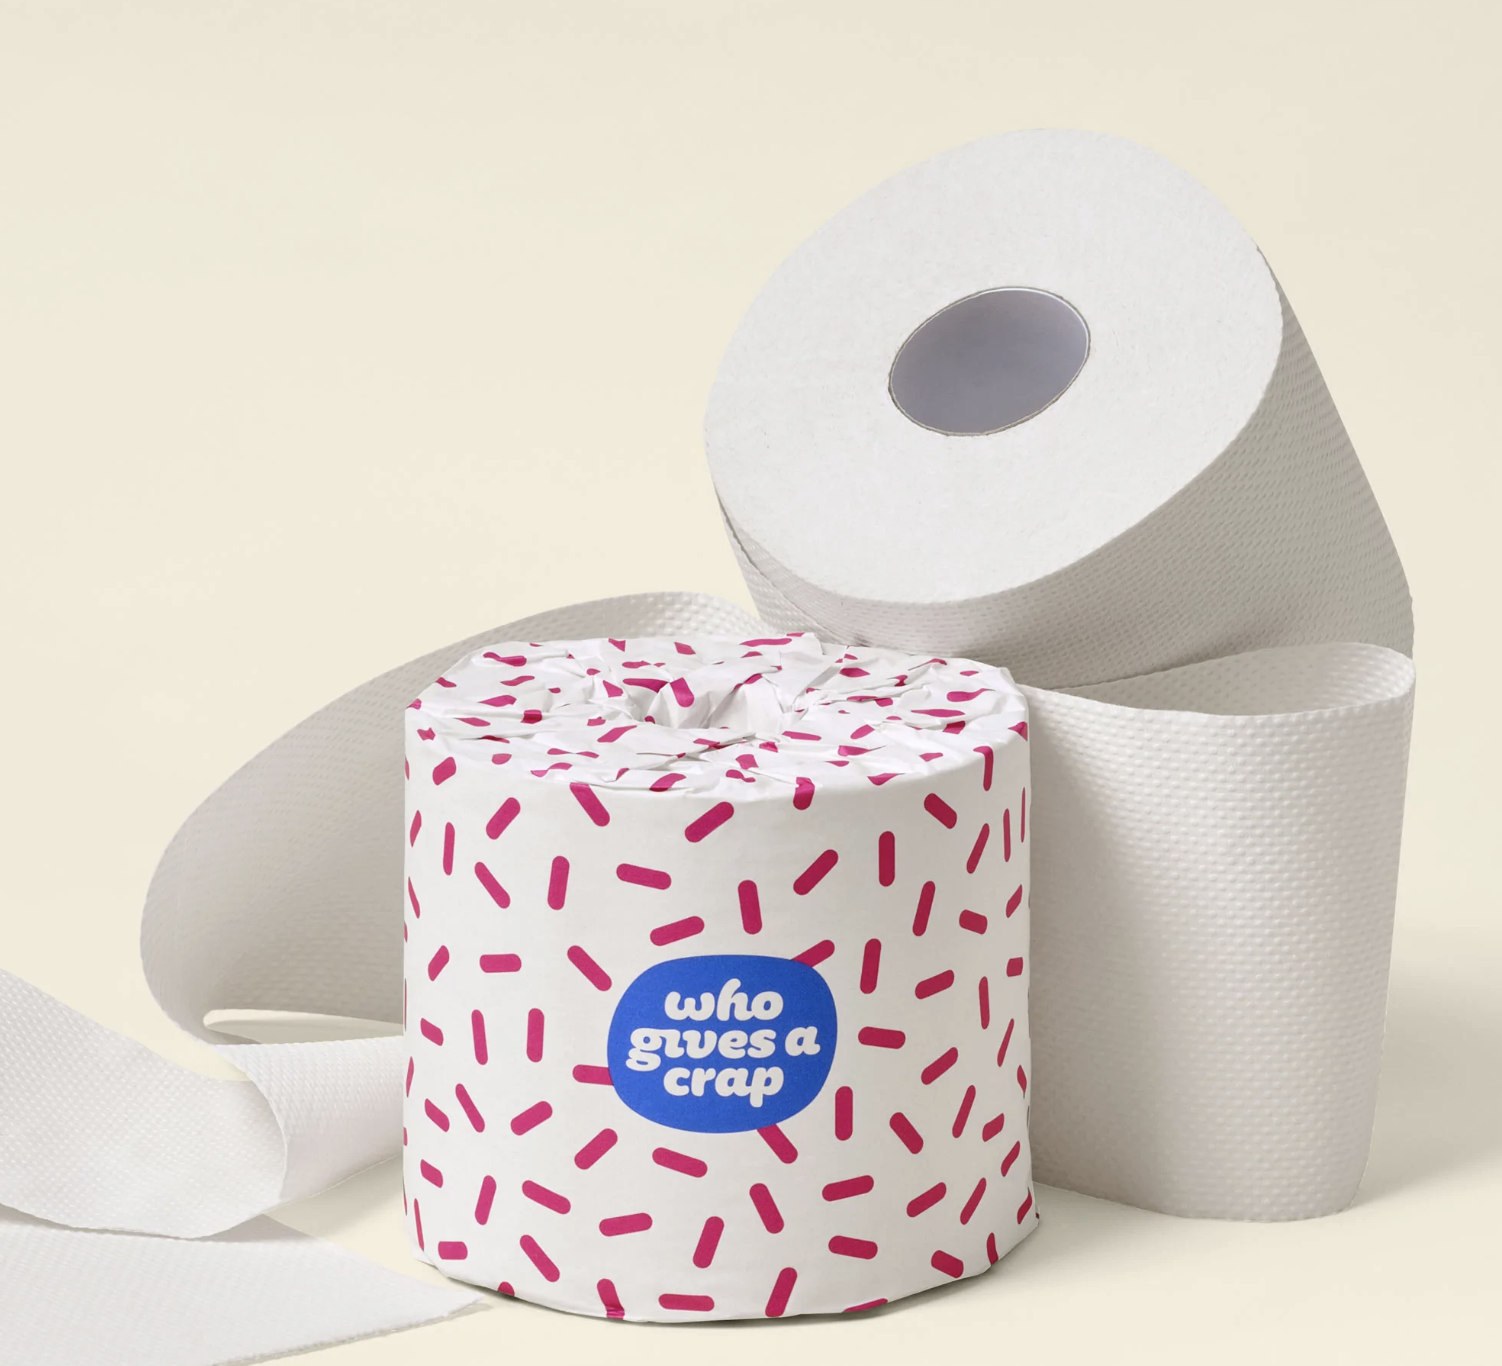 100% Recycled Toilet Paper | Who Gives a Crap